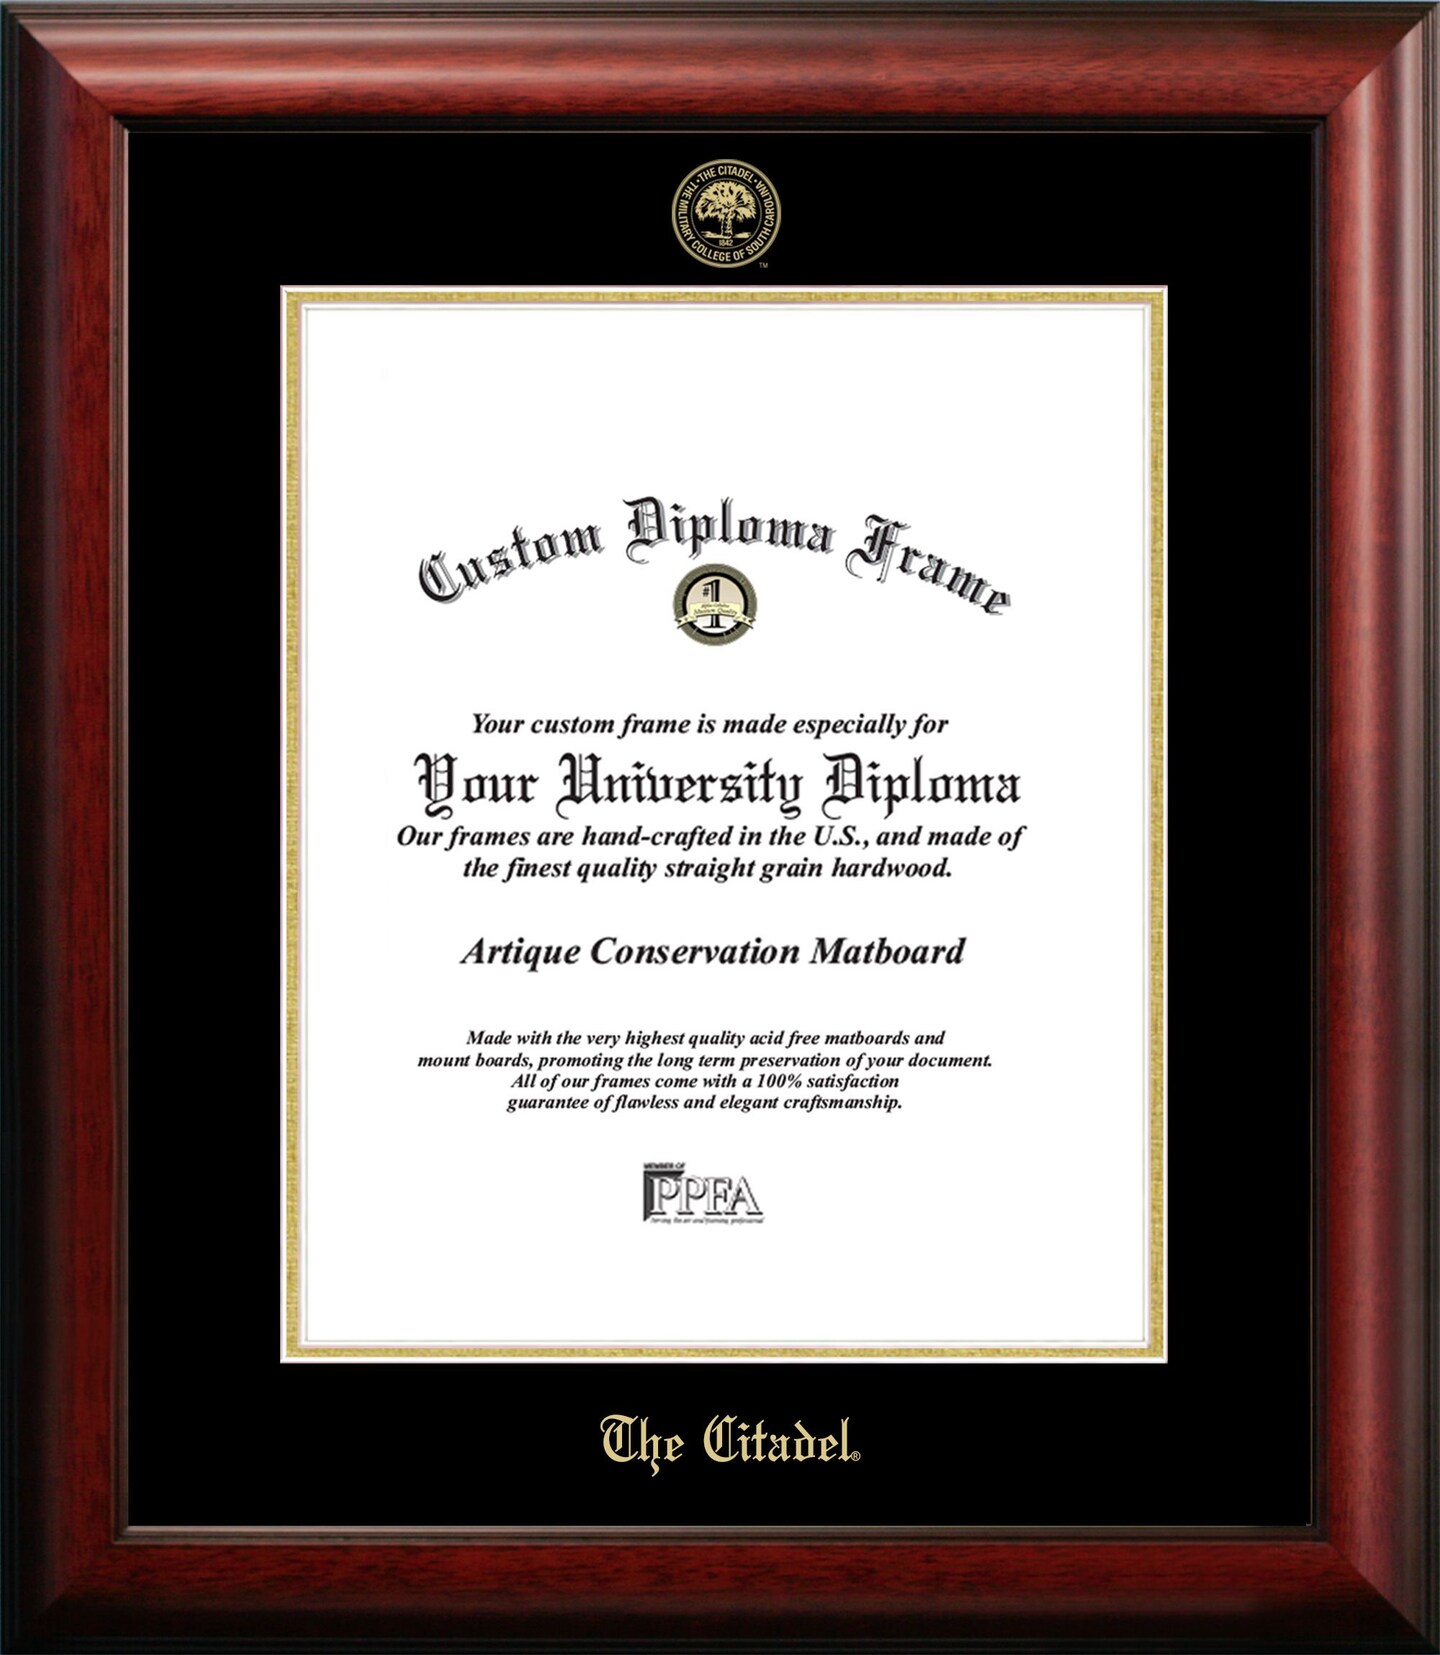 The Citadel 16w x 20h Gold Embossed Diploma Frame